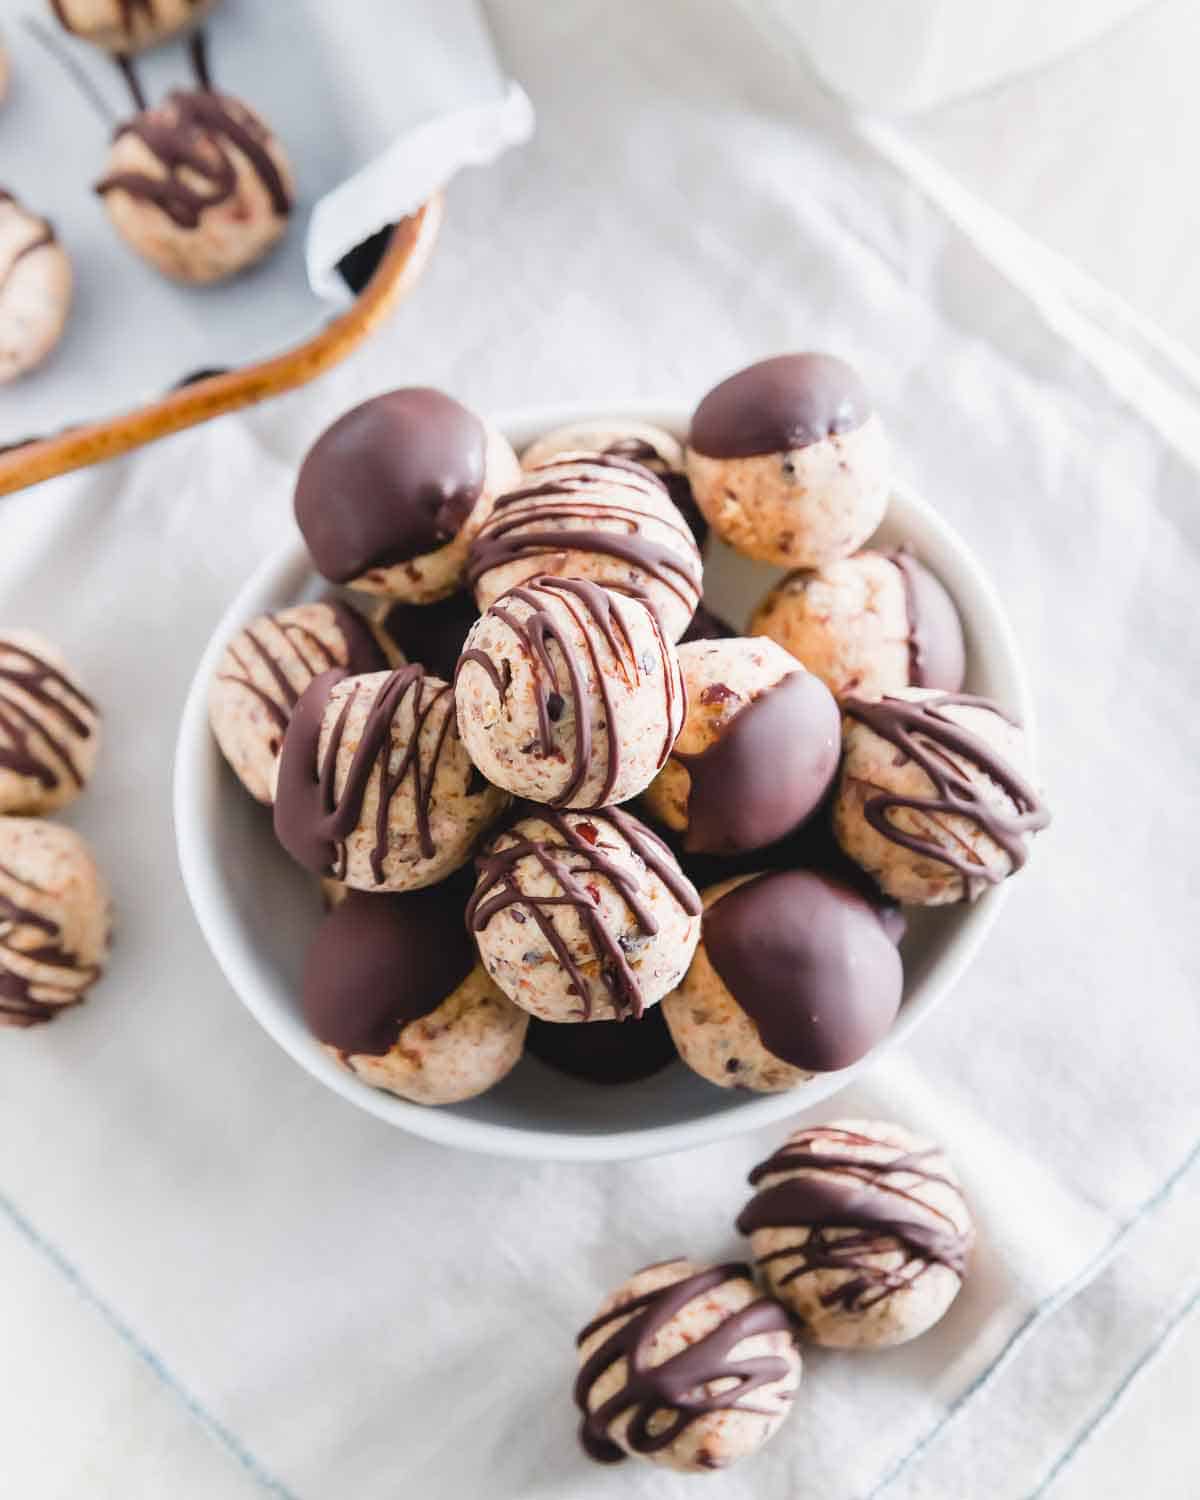 Healthy chocolate chip cookie dough bites have a wholesome, nutritious ingredient list and delicious taste.